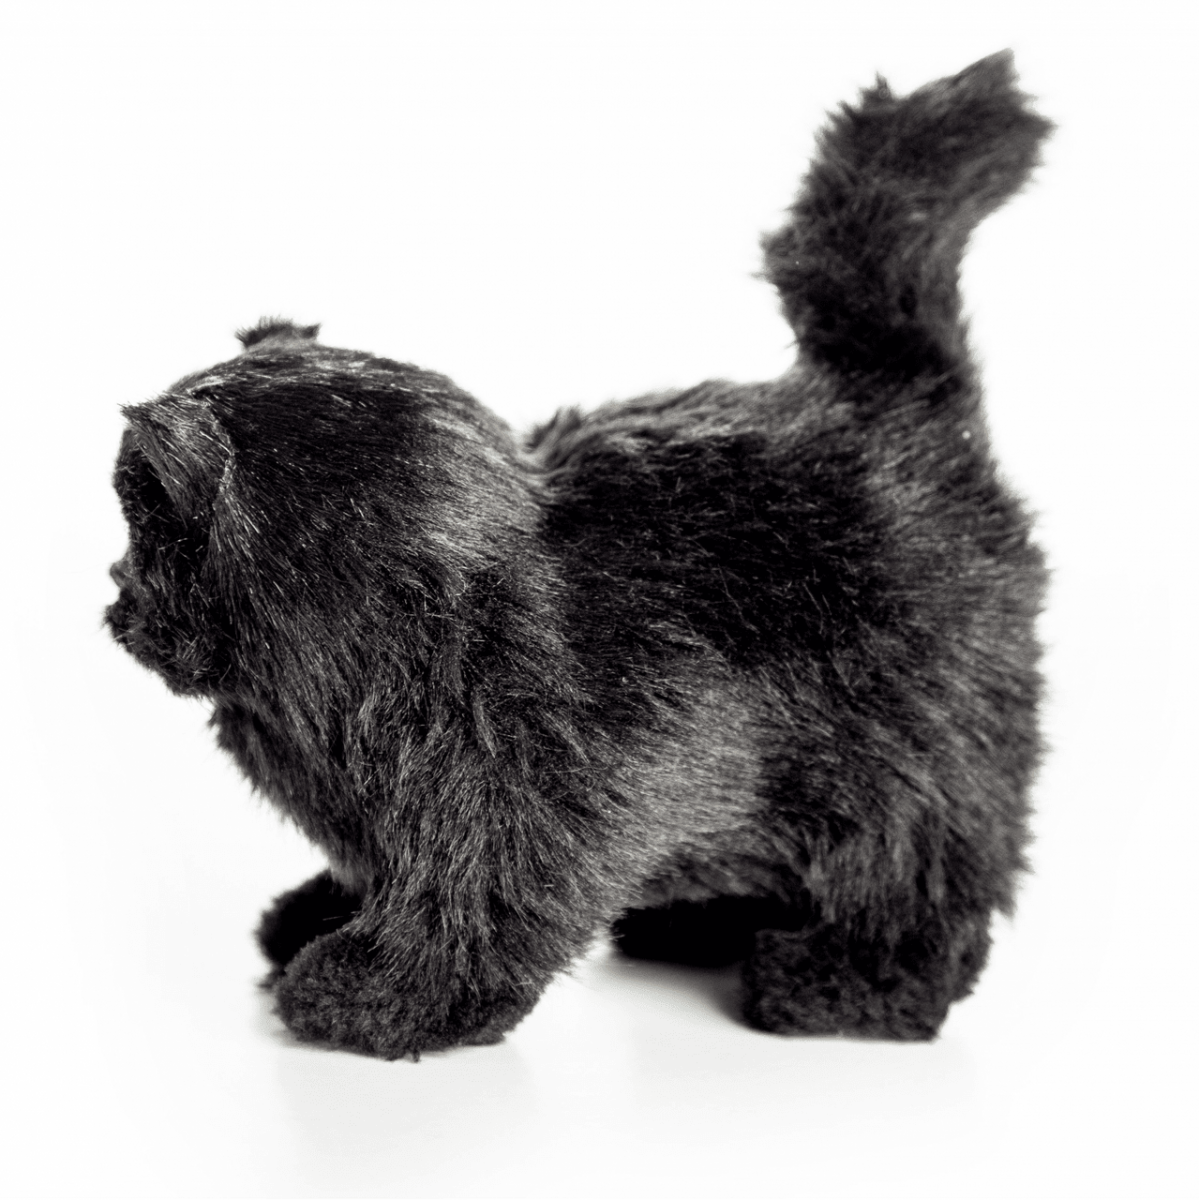 Little House on the Prairie 'Black Susan' Kitty, Pet Accessory Sized For 18 Inch Doll - Simon's Collectibles